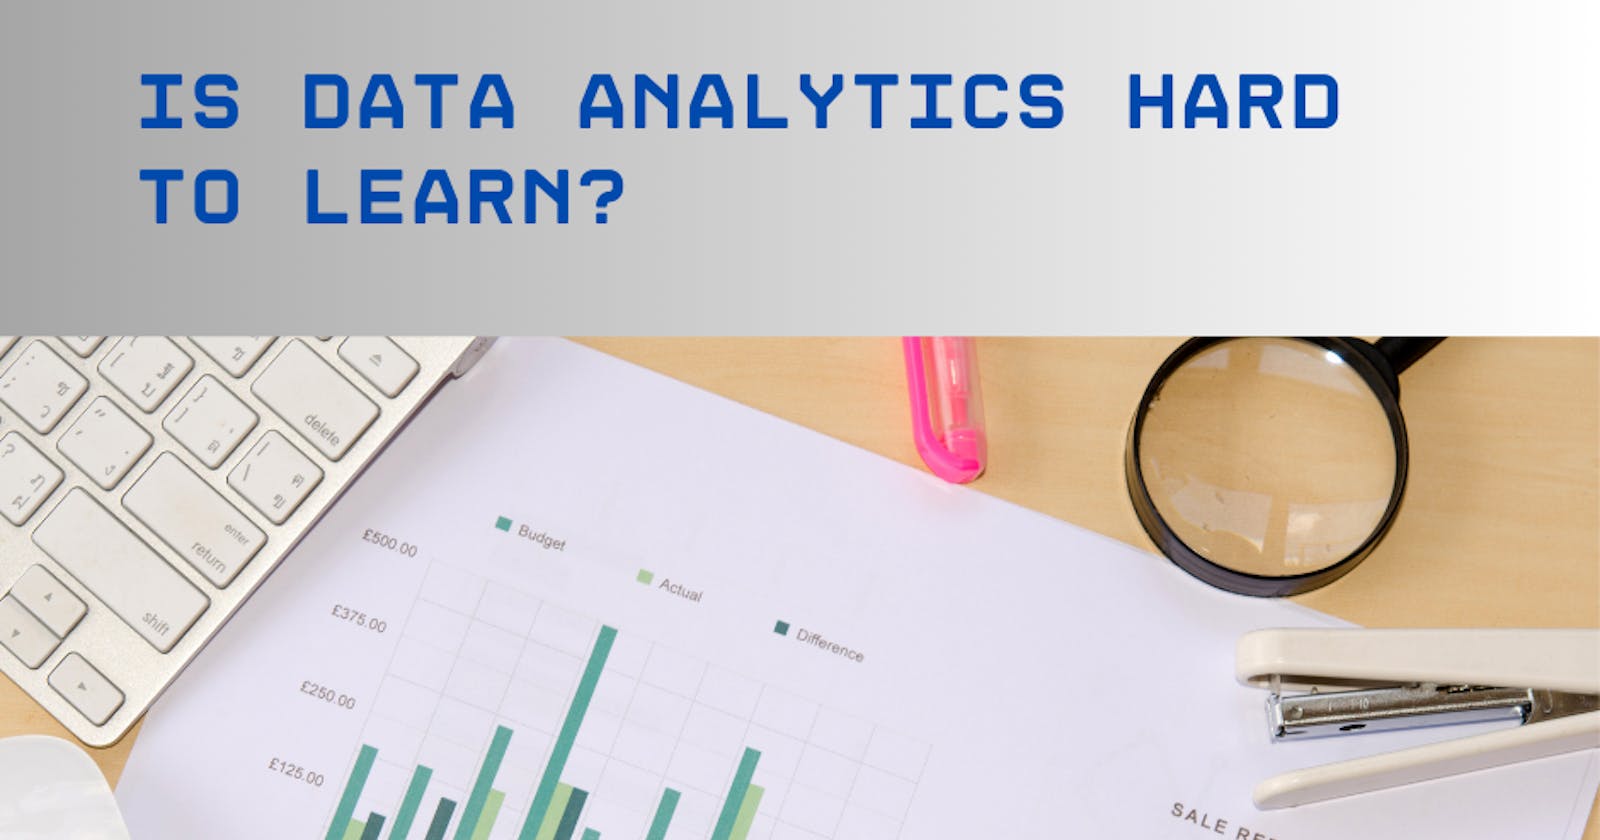 Is Data Analytics Hard to Learn? Let's explore!